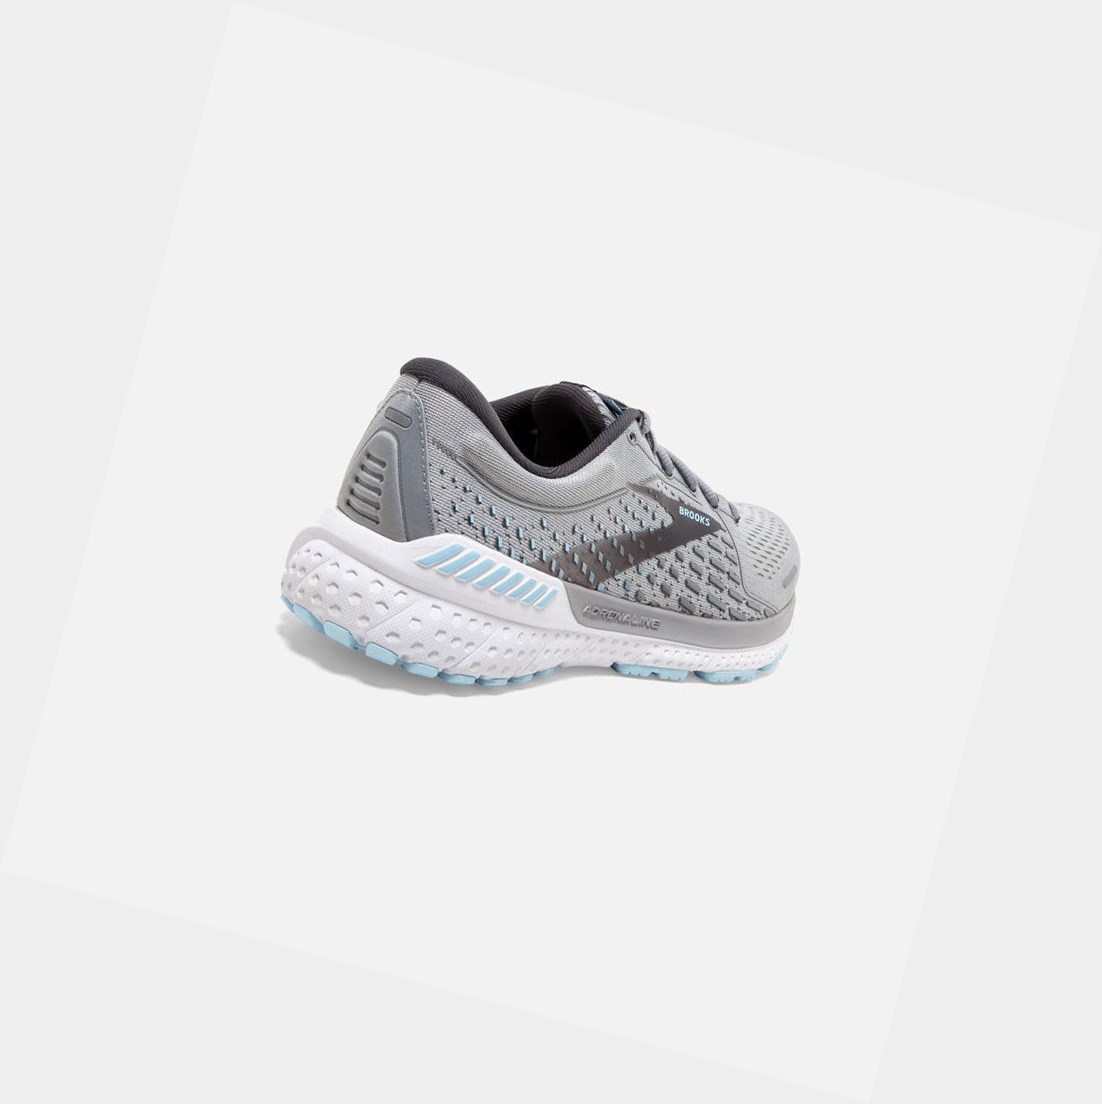 Brooks Adrenaline GTS 21 Women's Road Running Shoes Oyster / Alloy / Light Blue | YZIG-45690